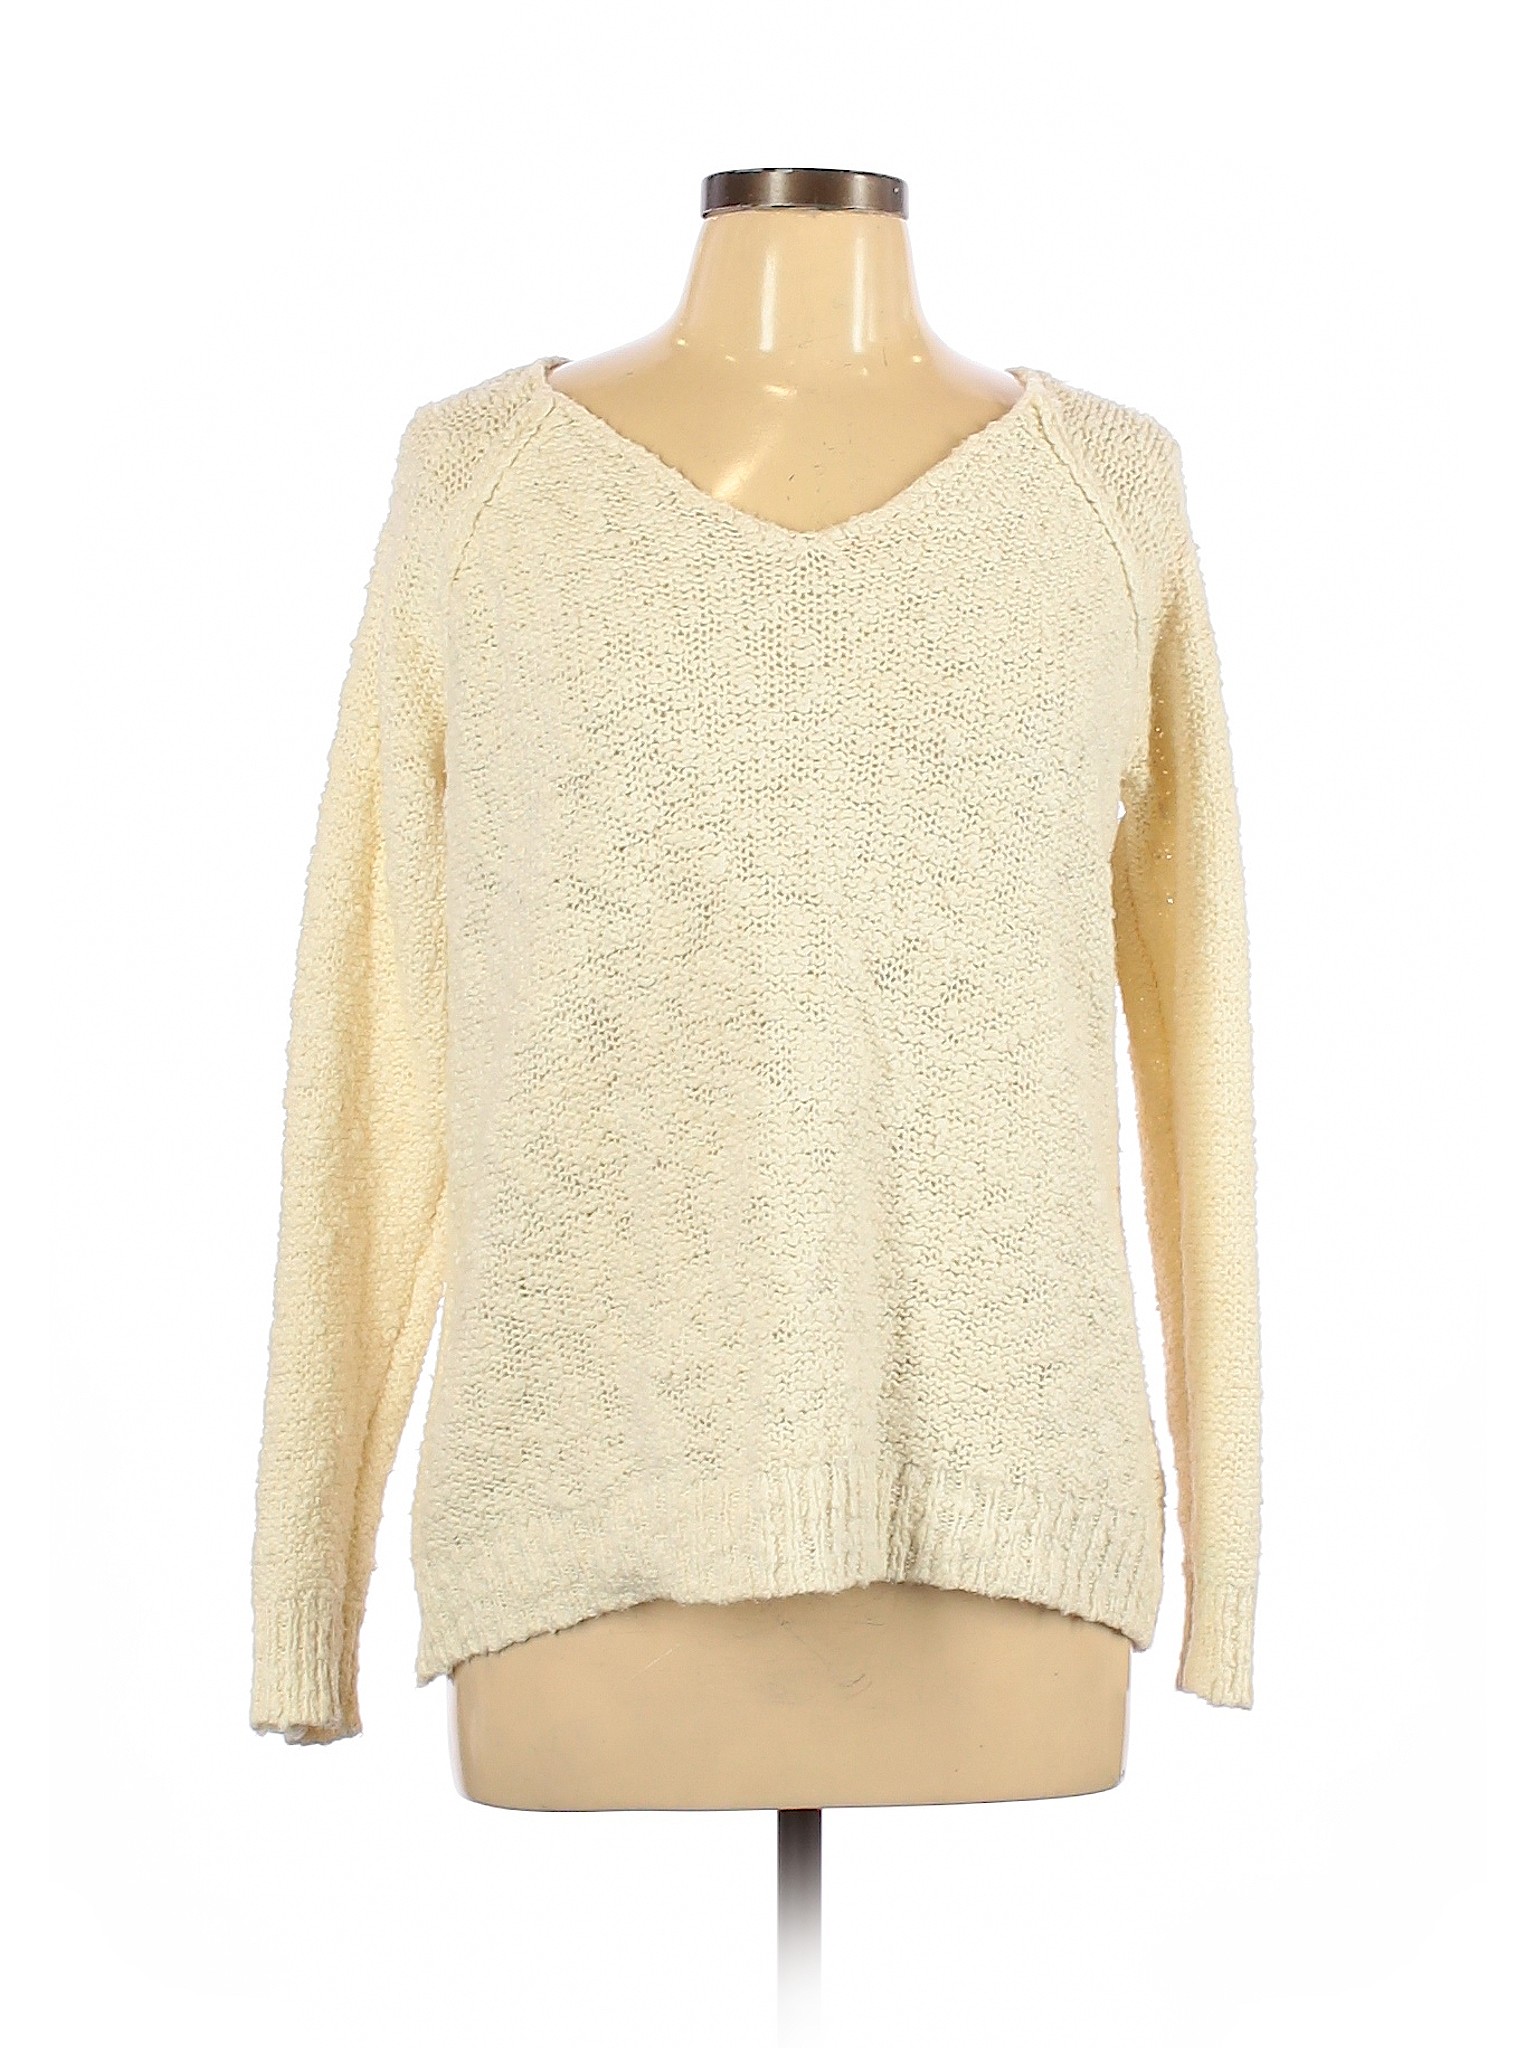 SONOMA life + style Women Ivory Pullover Sweater L | eBay